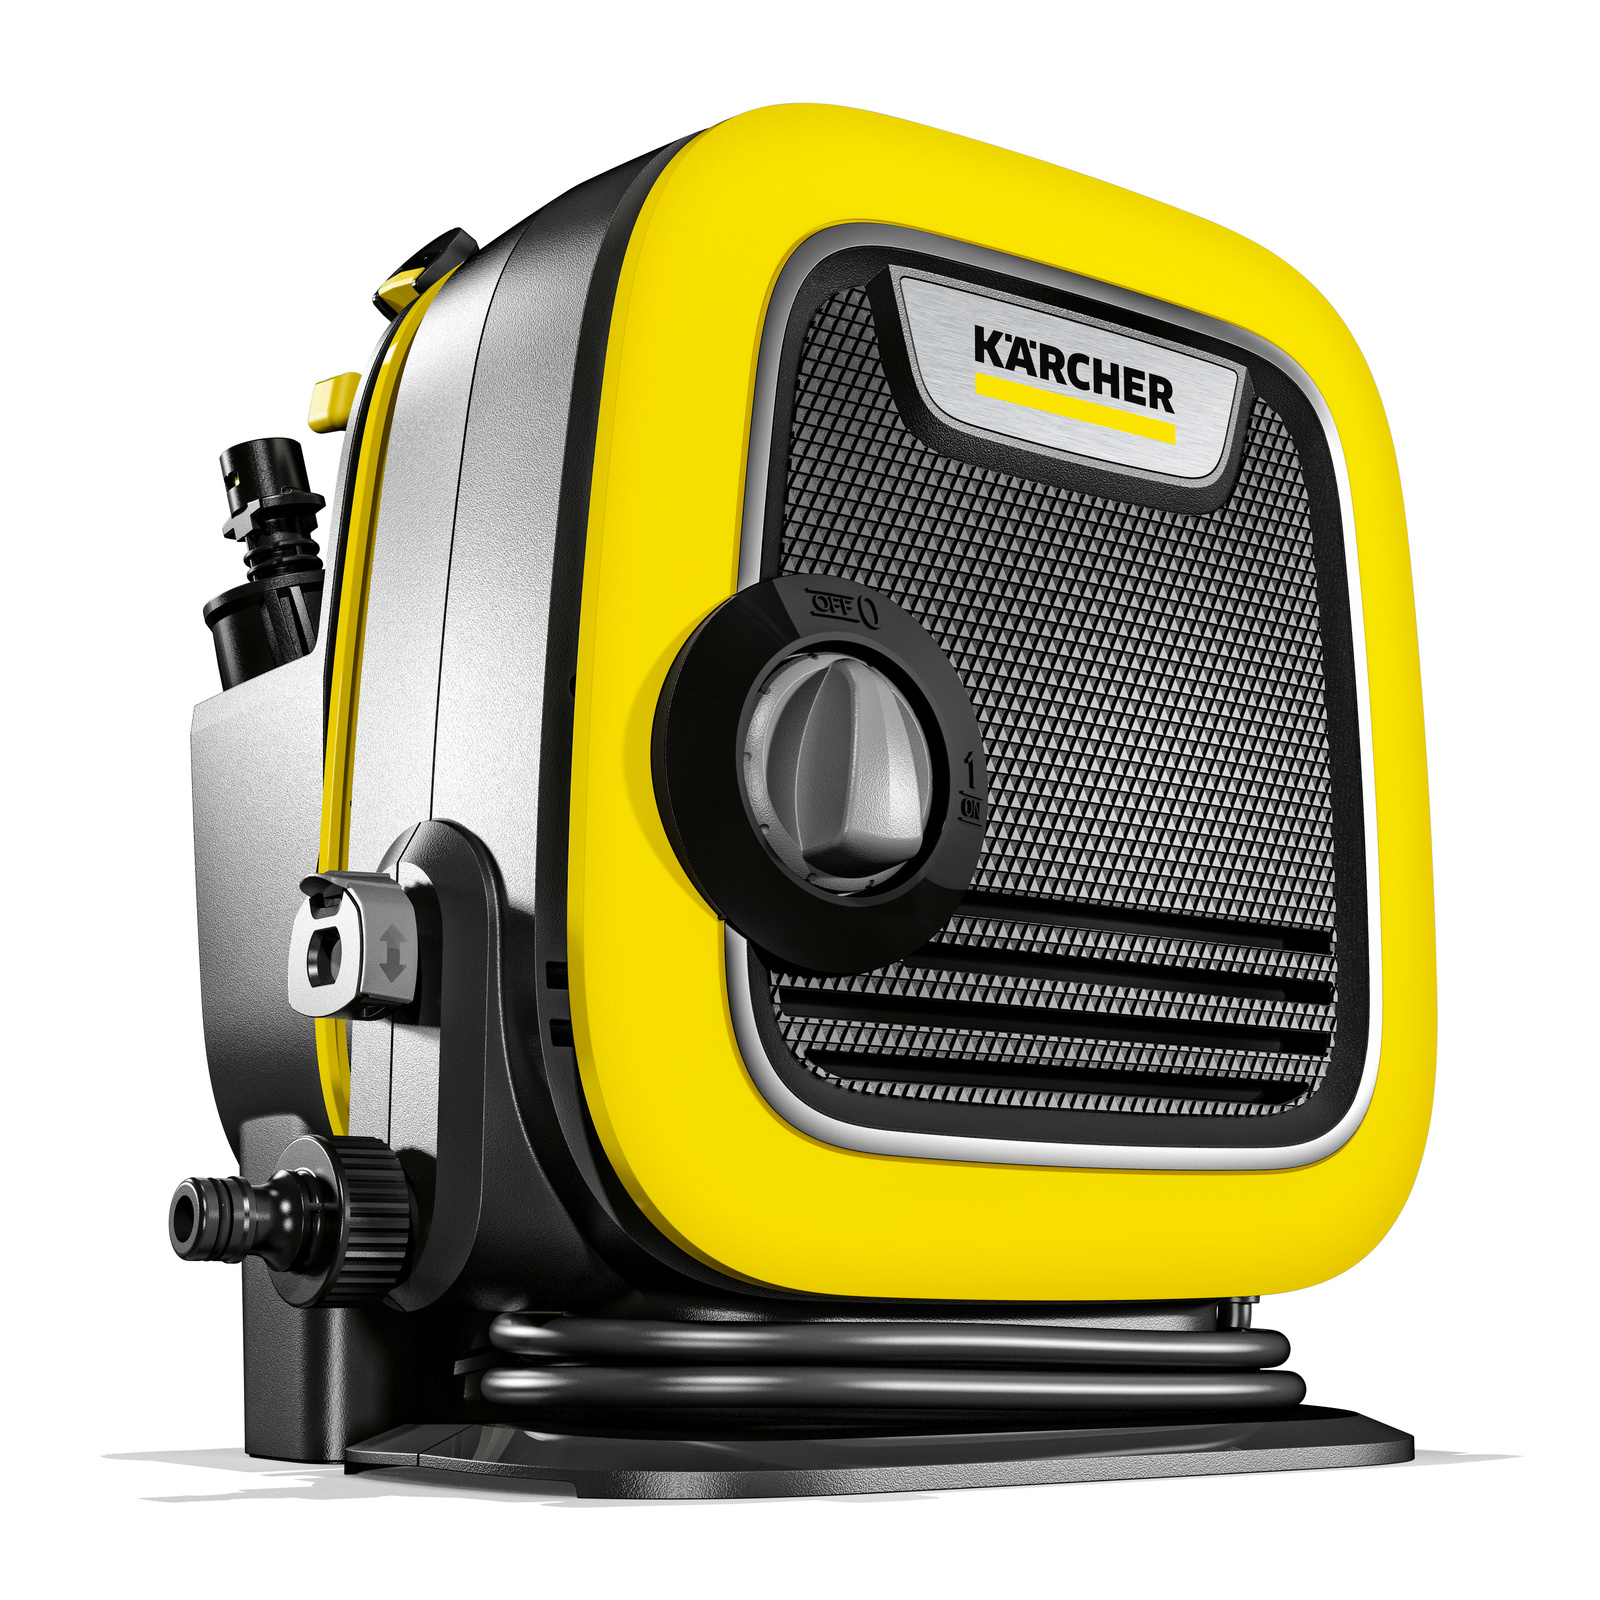 Introducing the K Mini, the smallest pressure washer from Kärcher